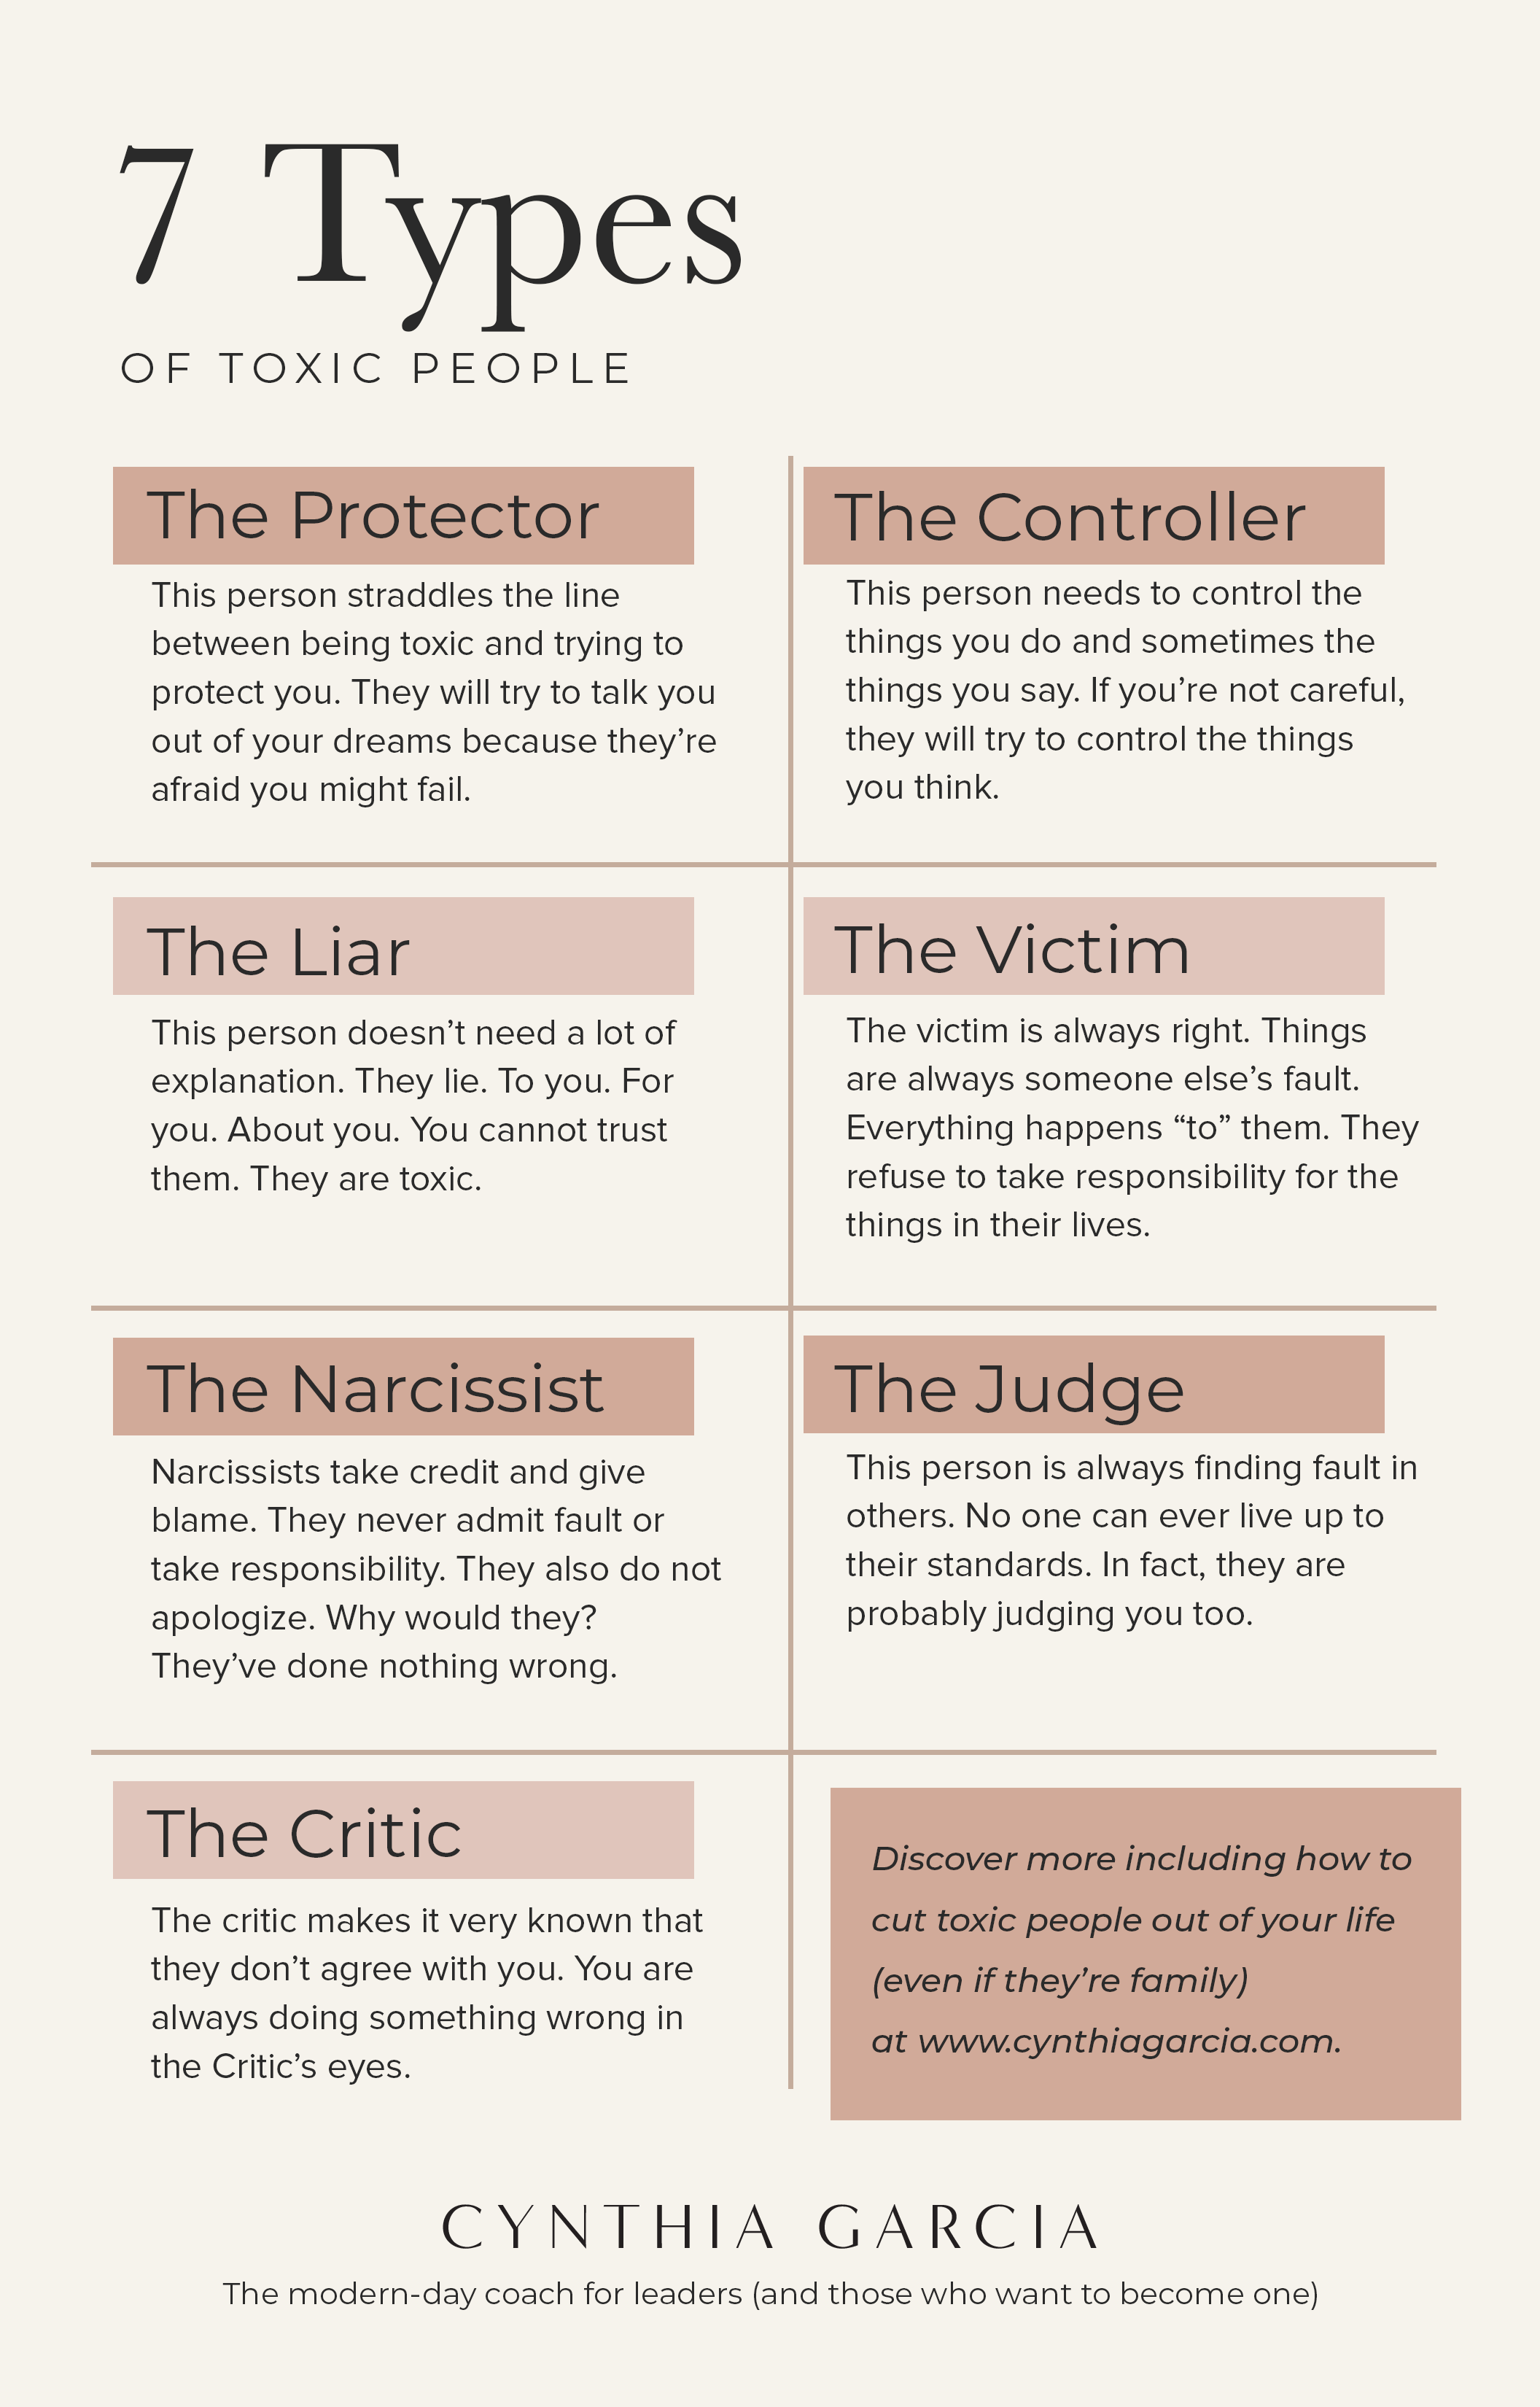 Toxic people are what 11 Characteristics